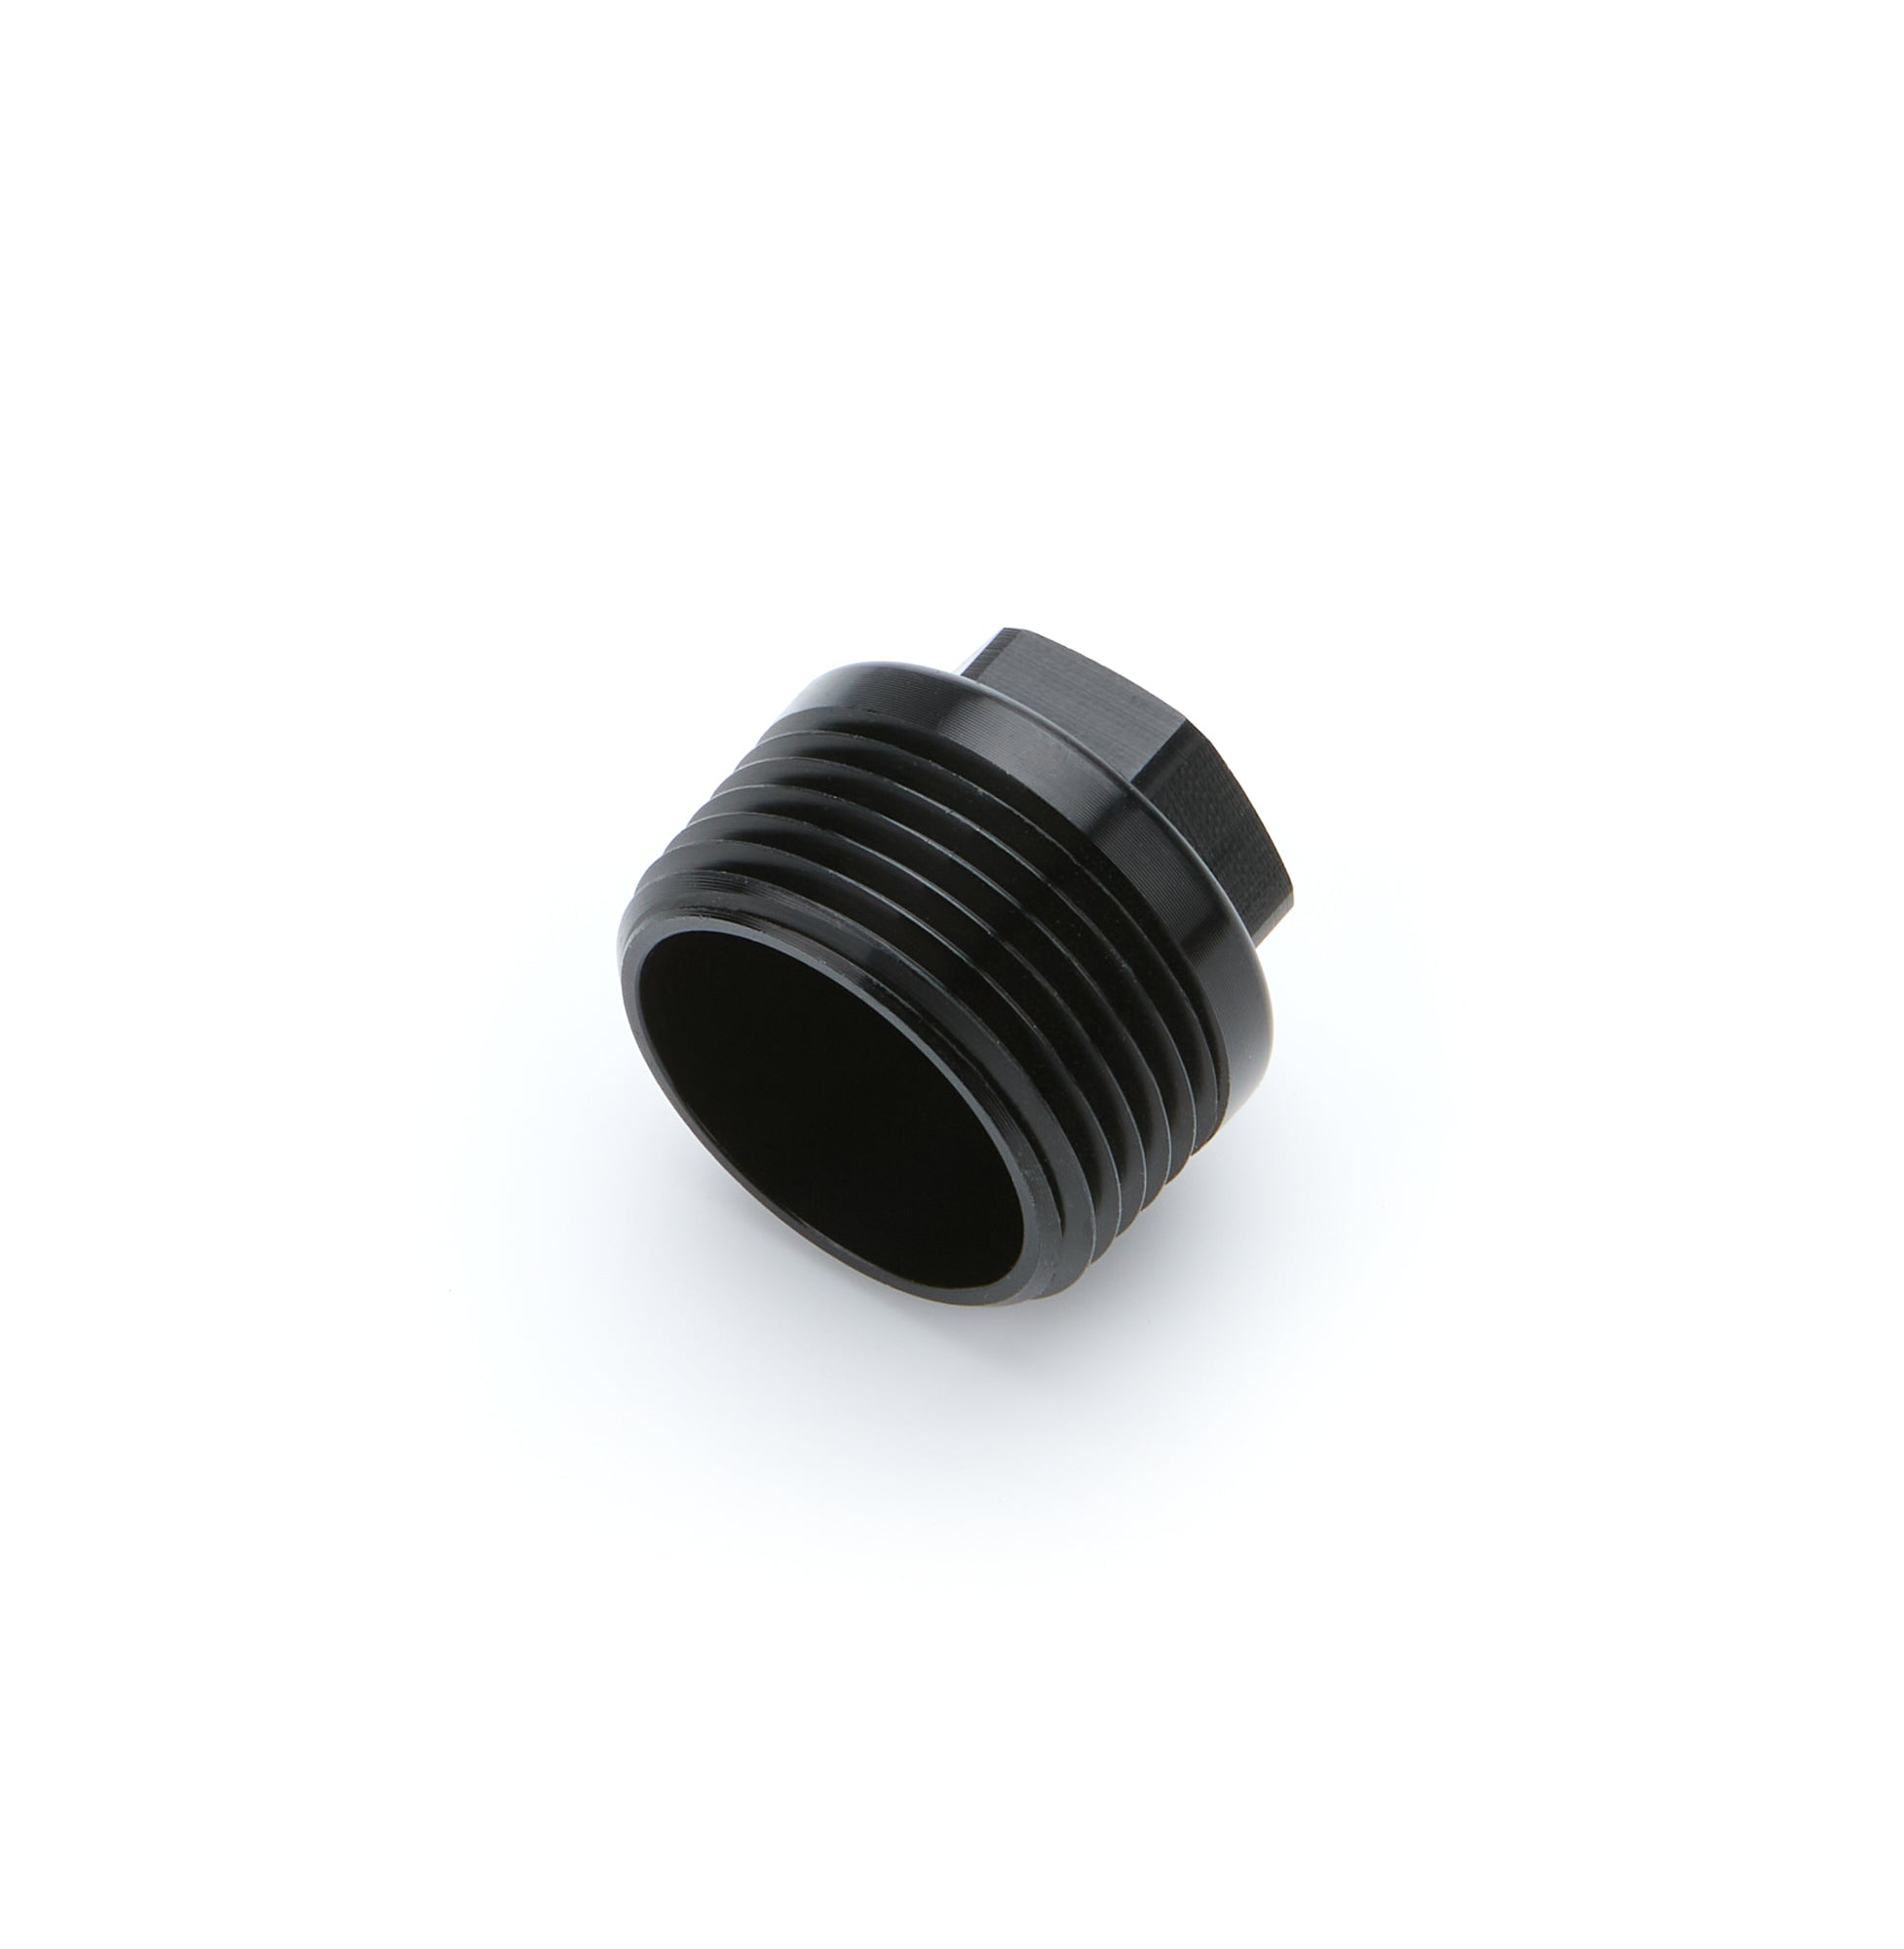 Aeromotive 1in NPT Plug Fitting  Fittings and Plugs Cap and Plug Fittings main image